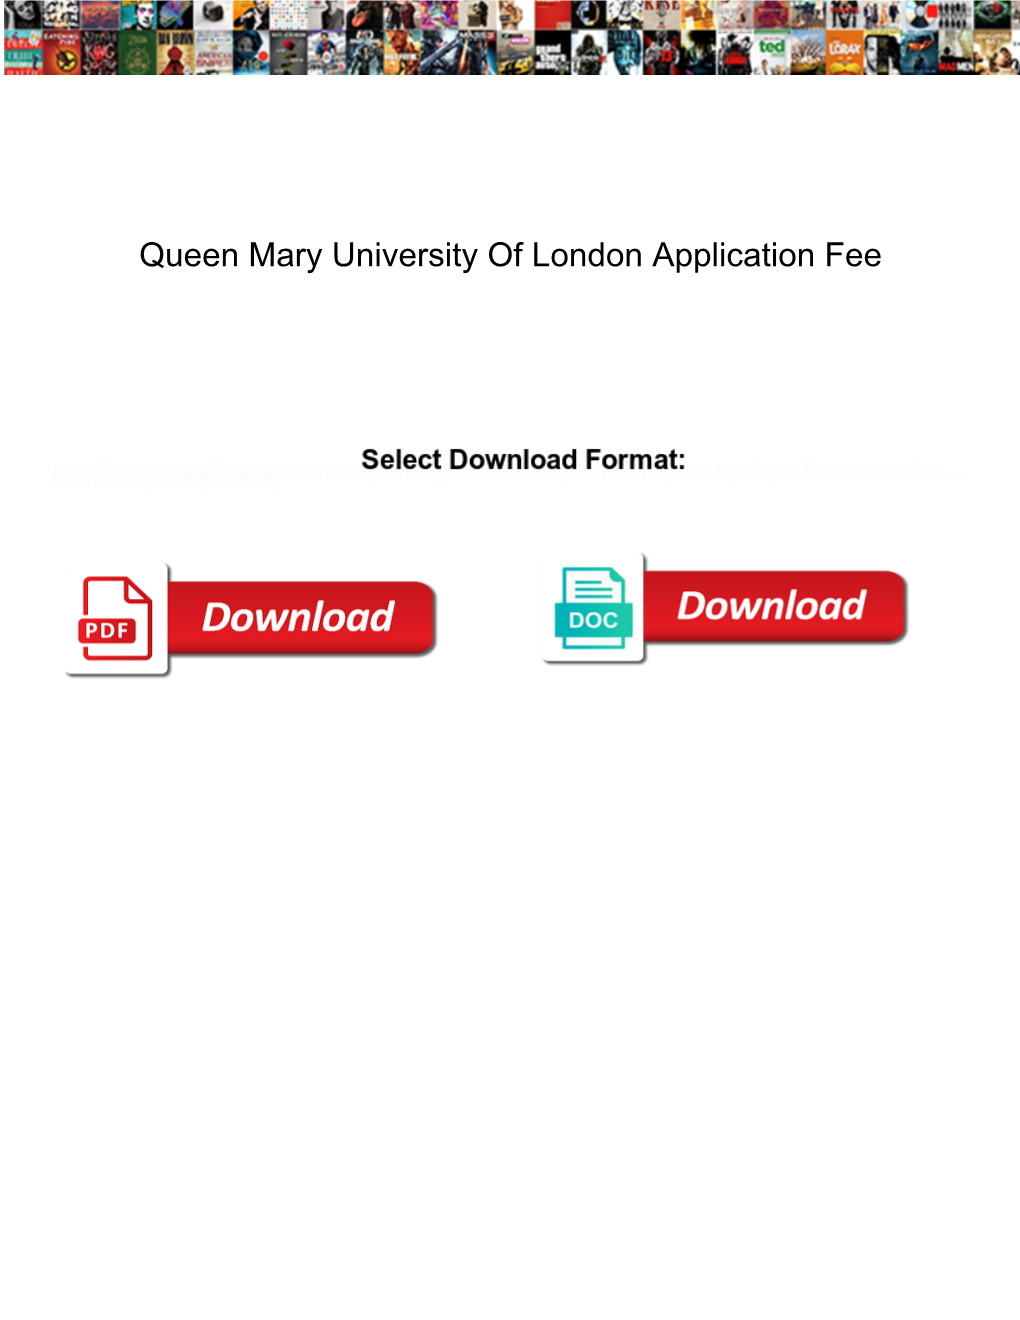 Queen Mary University of London Application Fee